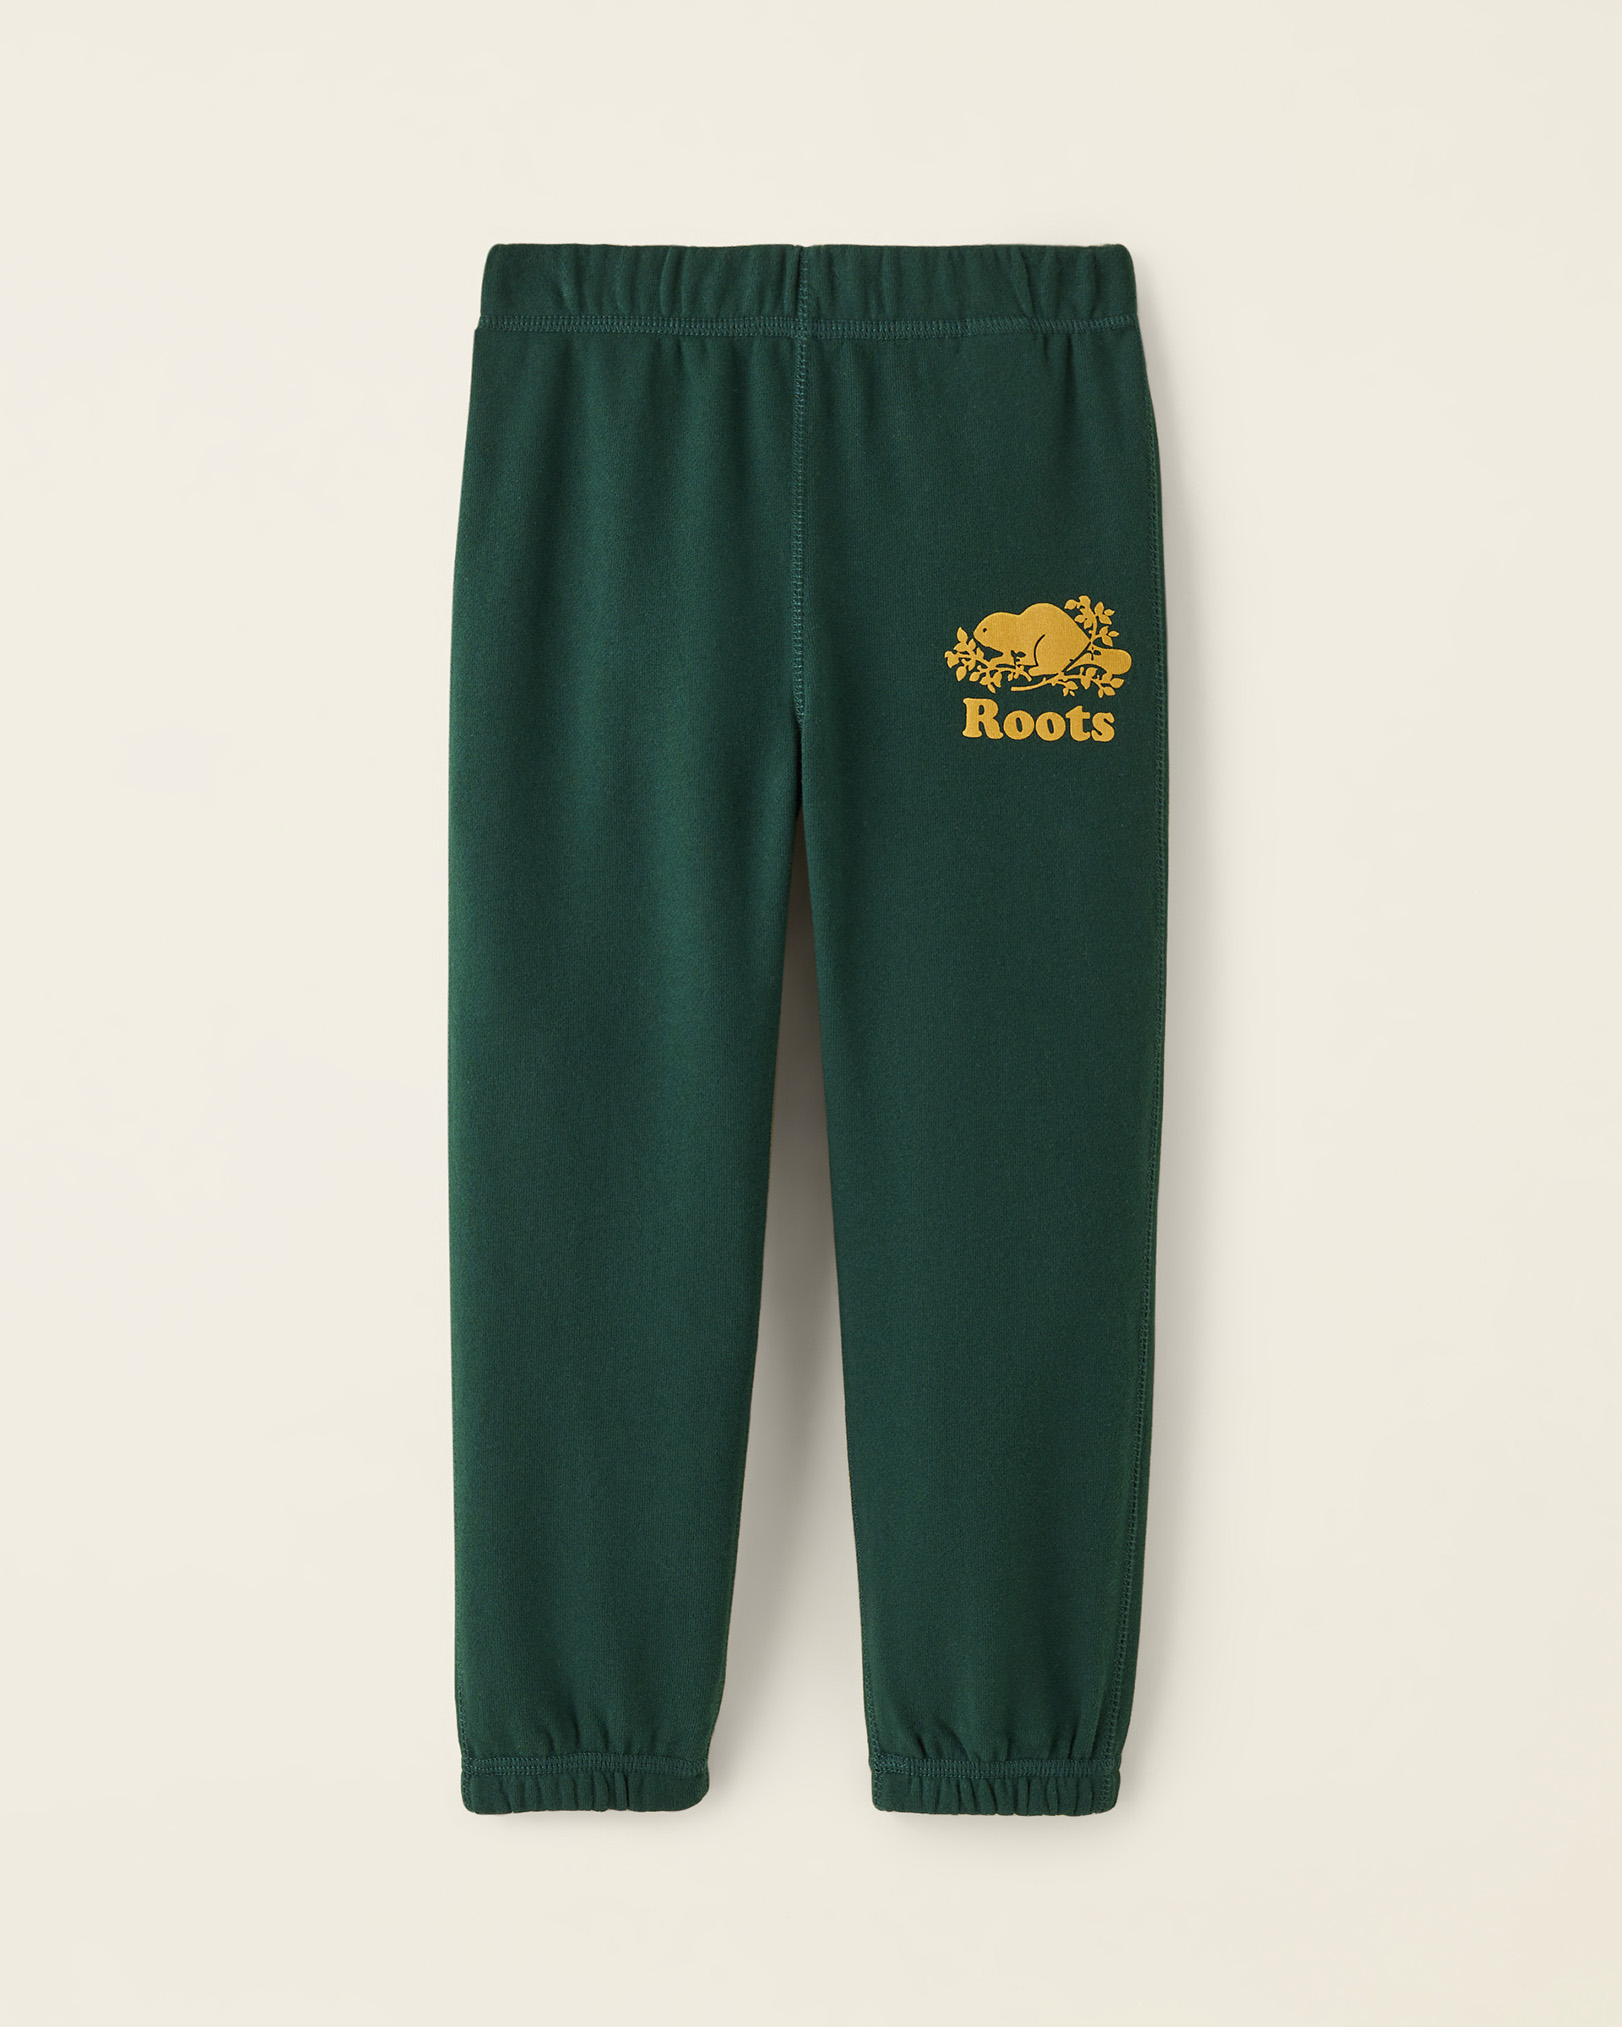 Roots Toddler 50th Cooper Sweatpant in Varsity Green